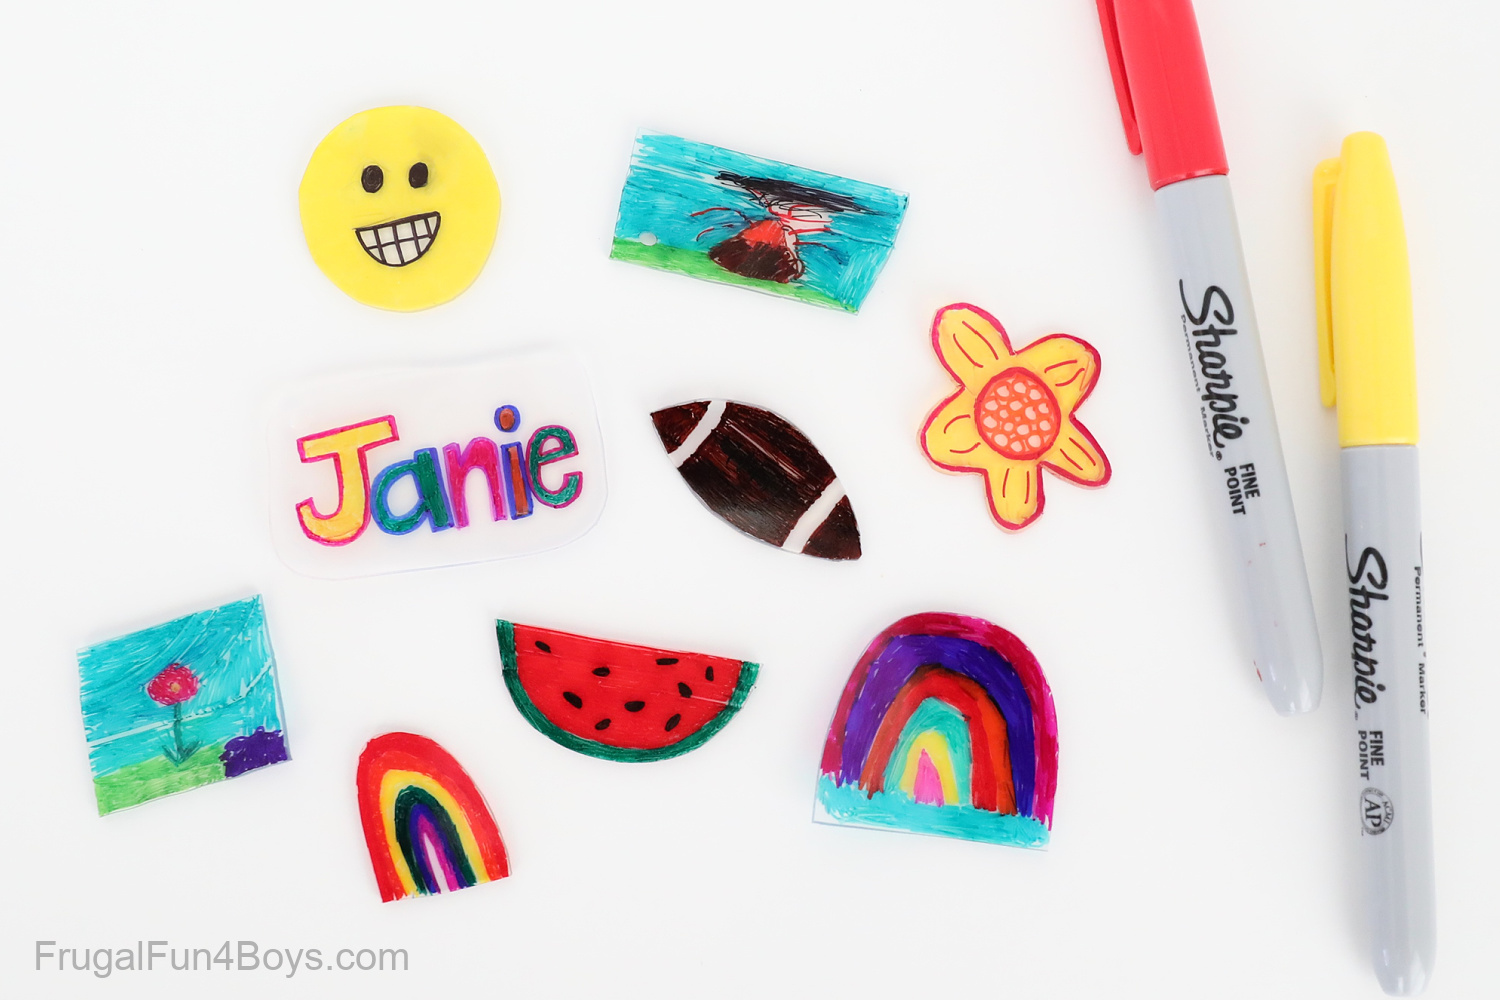 Fall in Love with Shrinky Dinks from Plastic #6